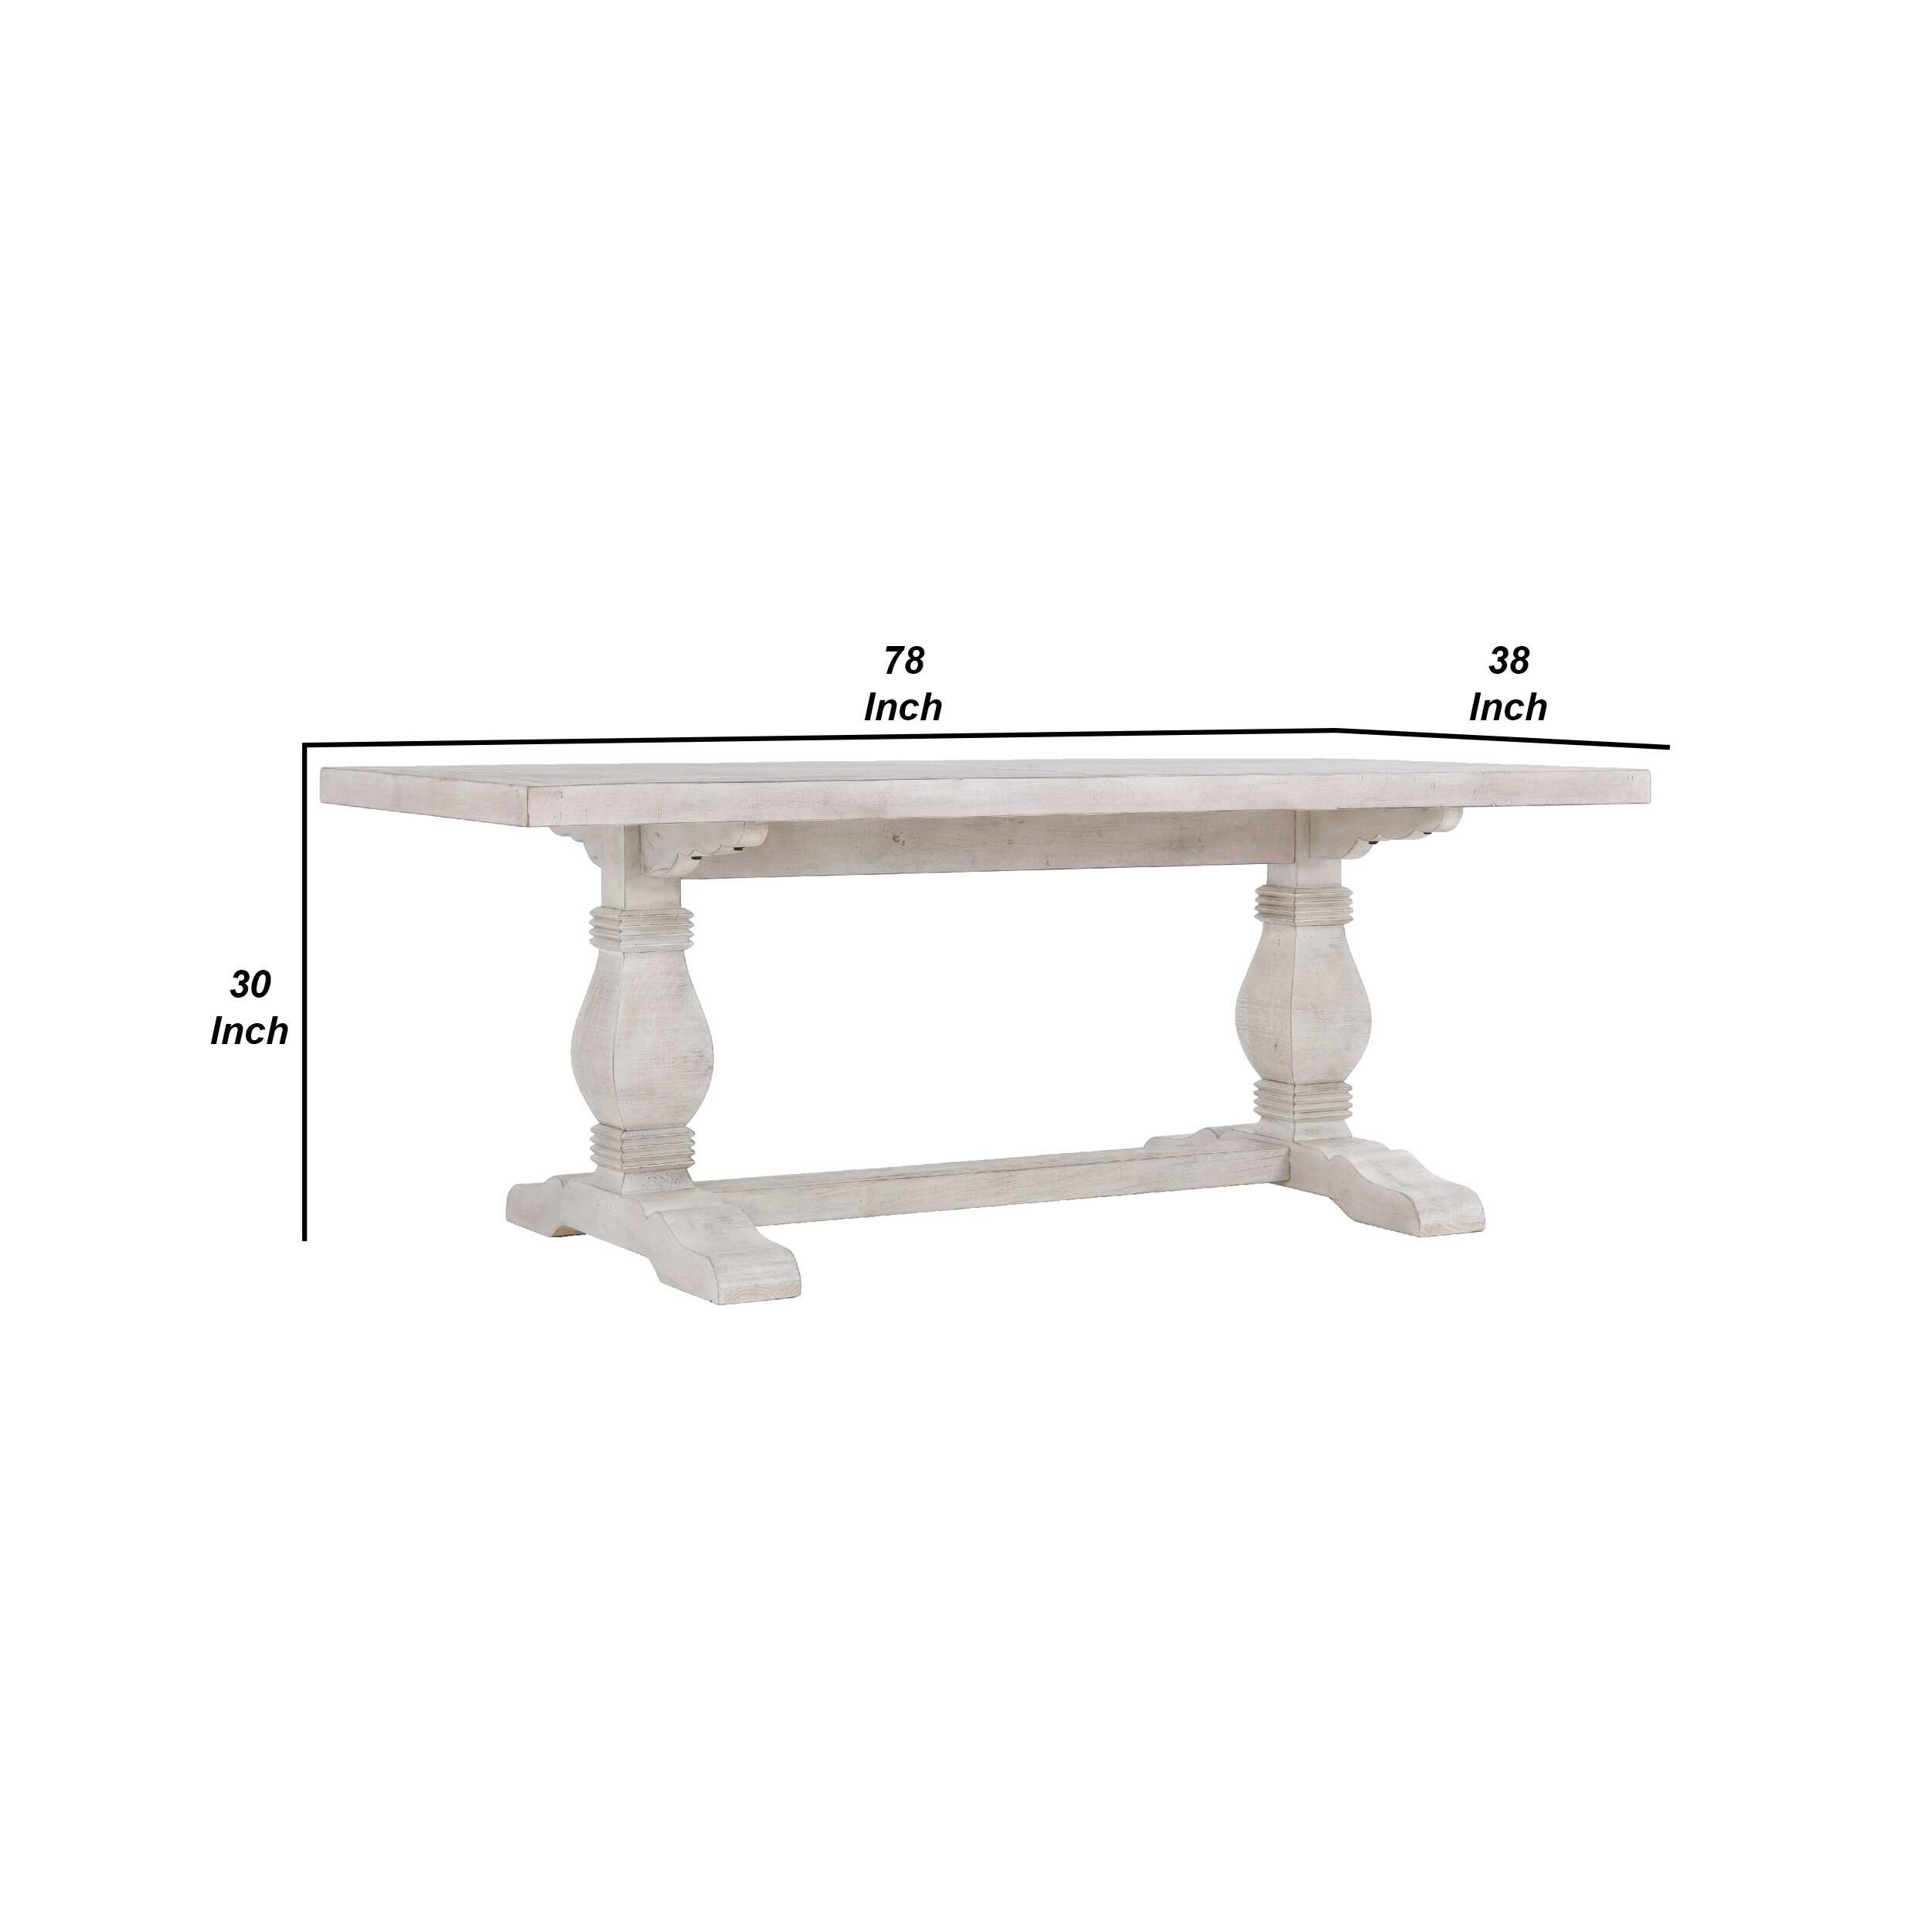 Kai 78 Inch Reclaimed Pine Dining Table, Double Turned Pedestals, White